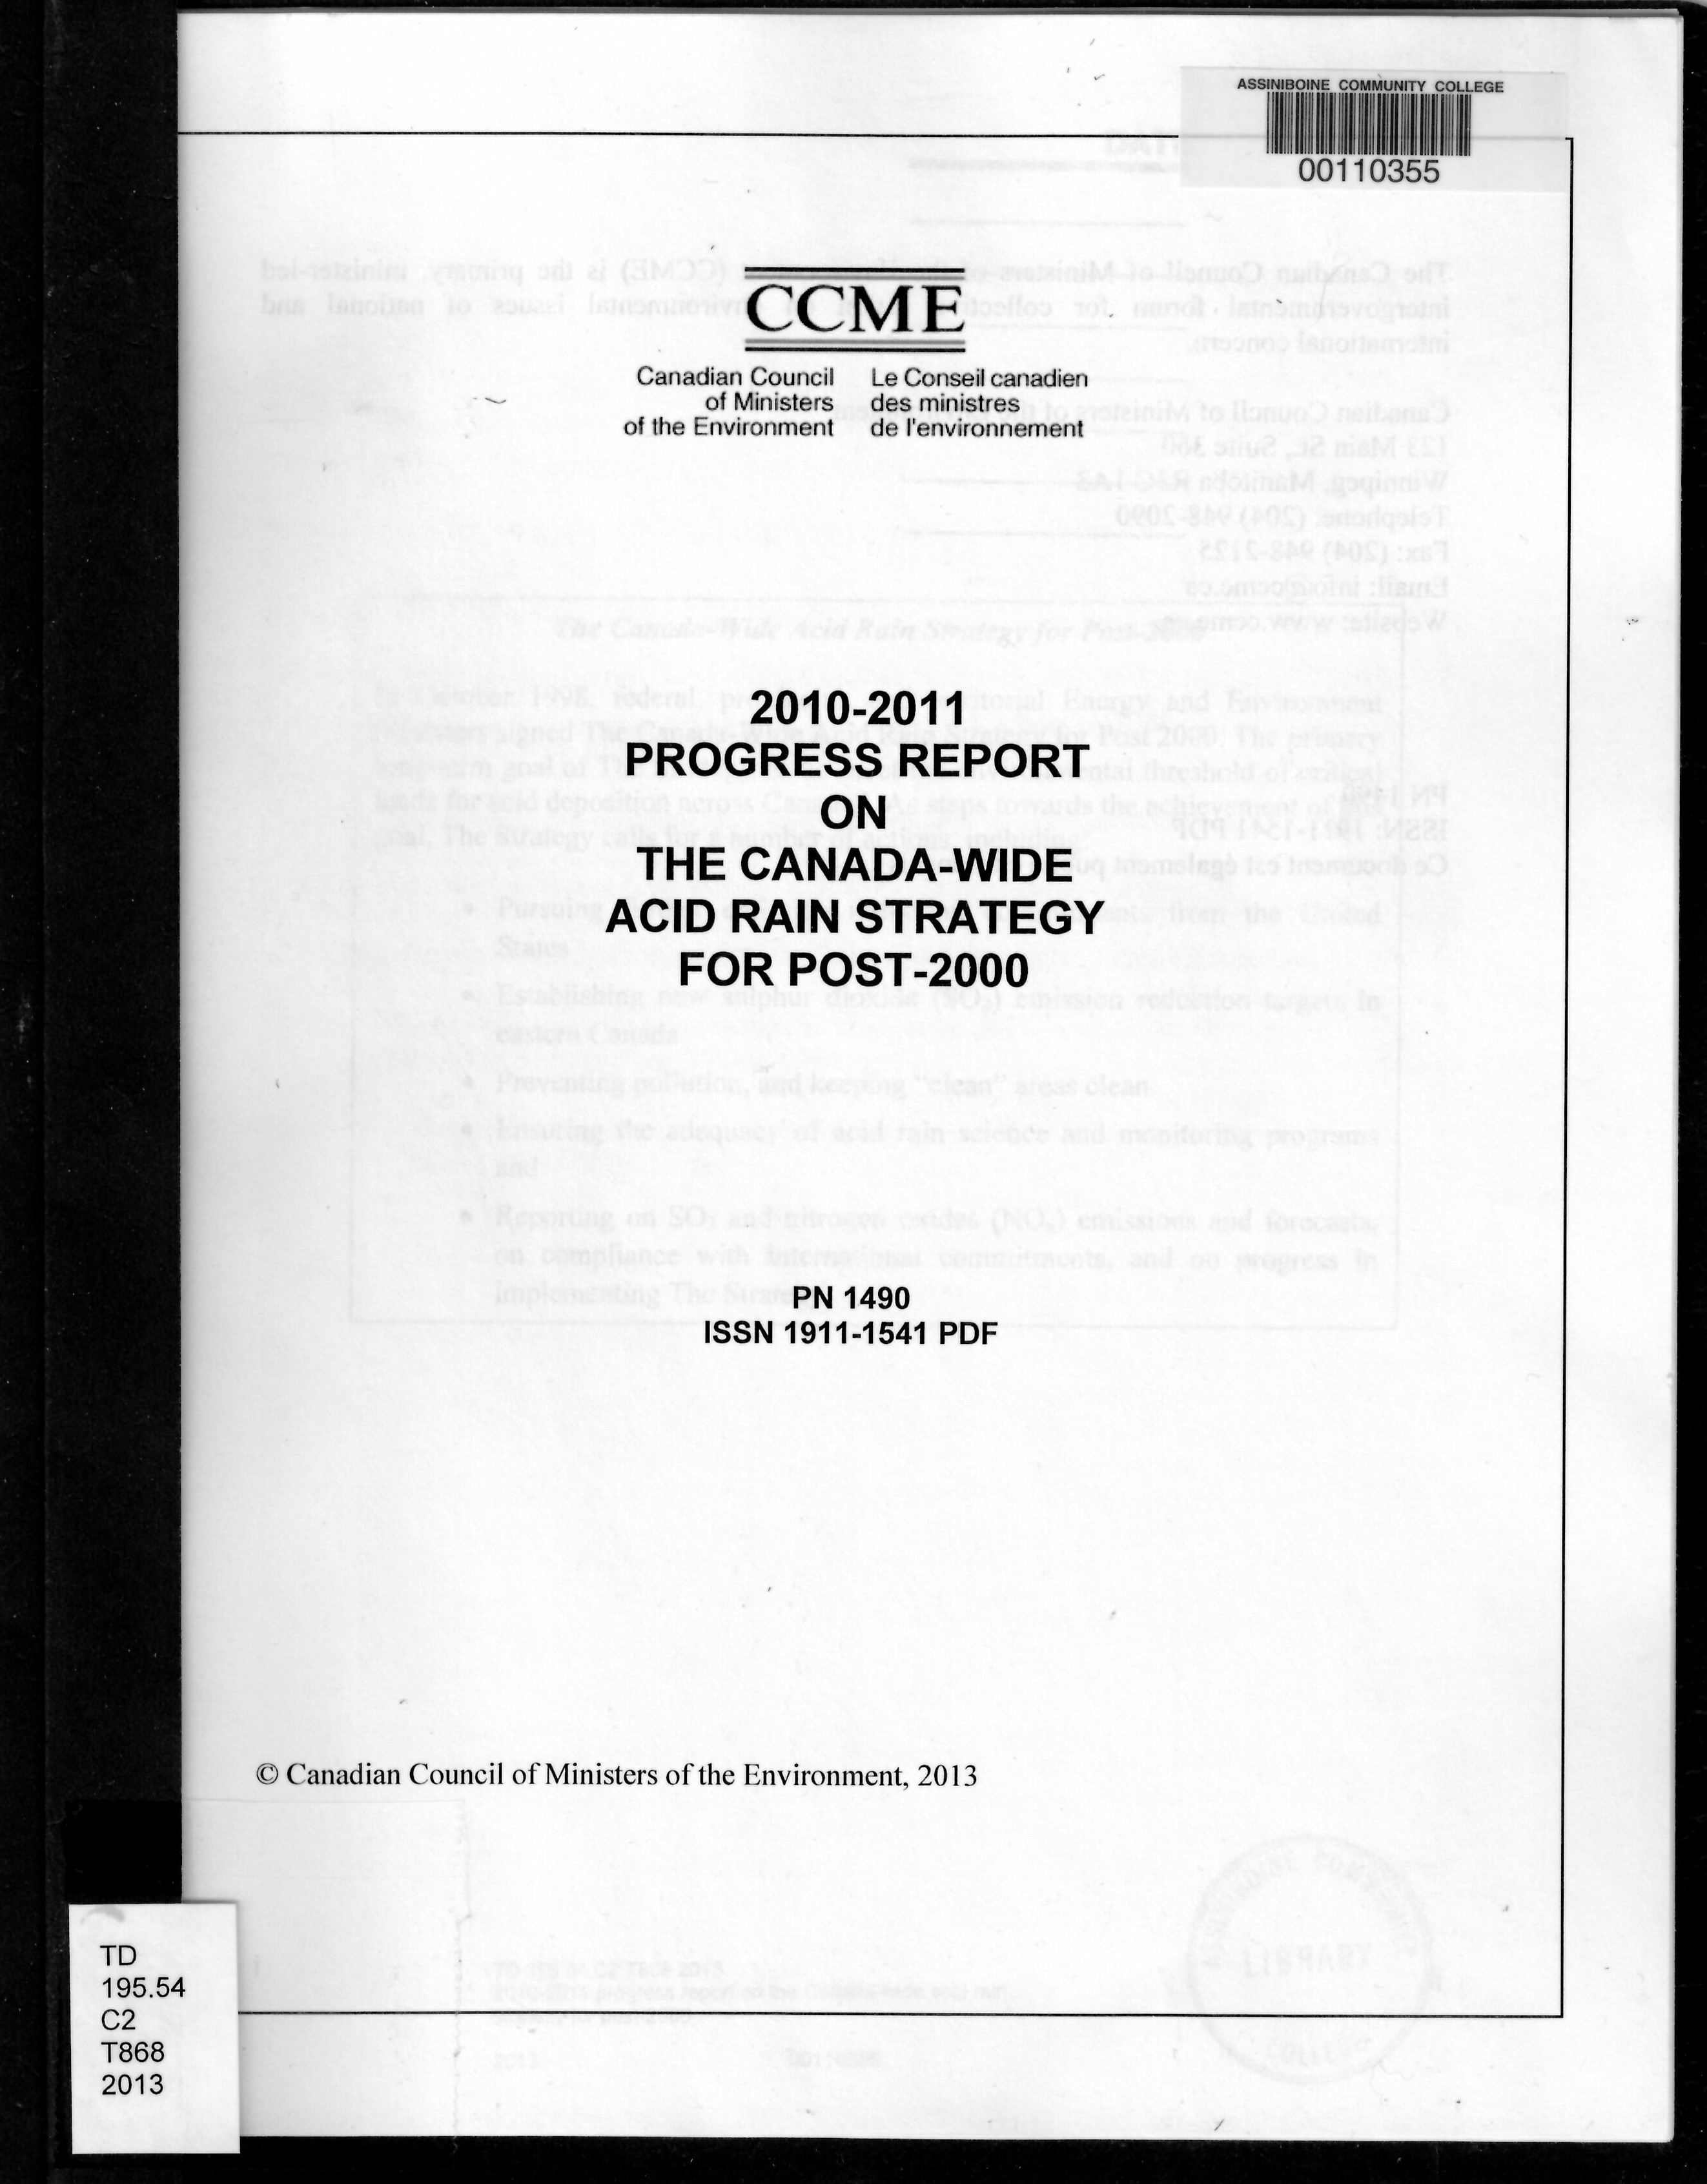 2010-2011 progress report on the Canada-wide acid rain strategy for post-2000